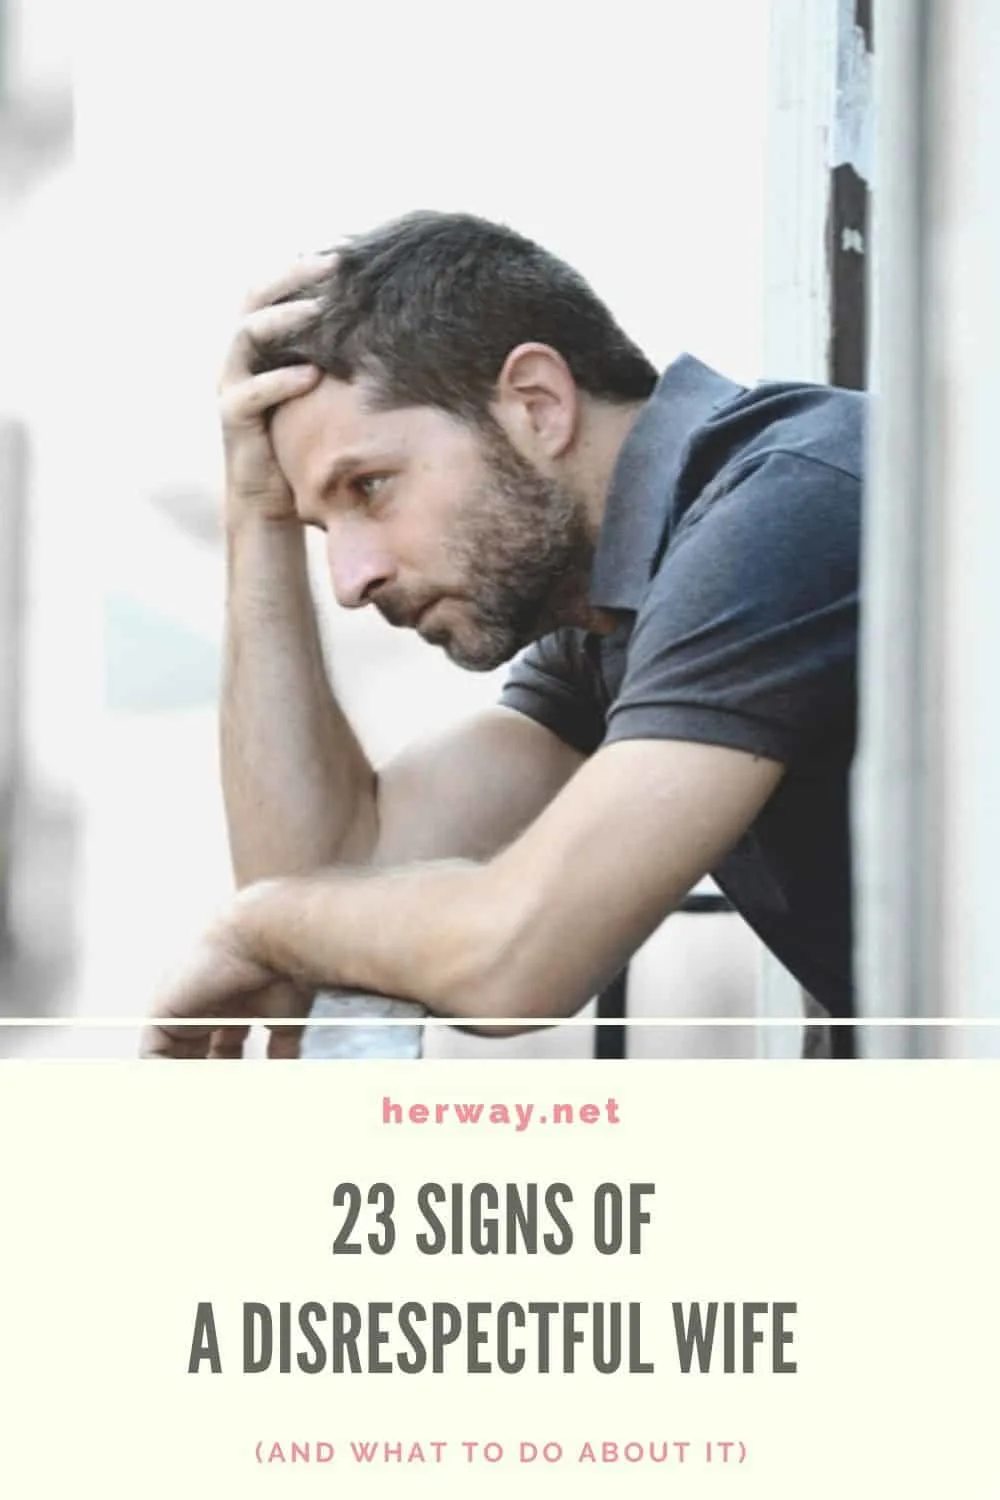 23 Signs Of A Disrespectful Wife (And What To Do About It)